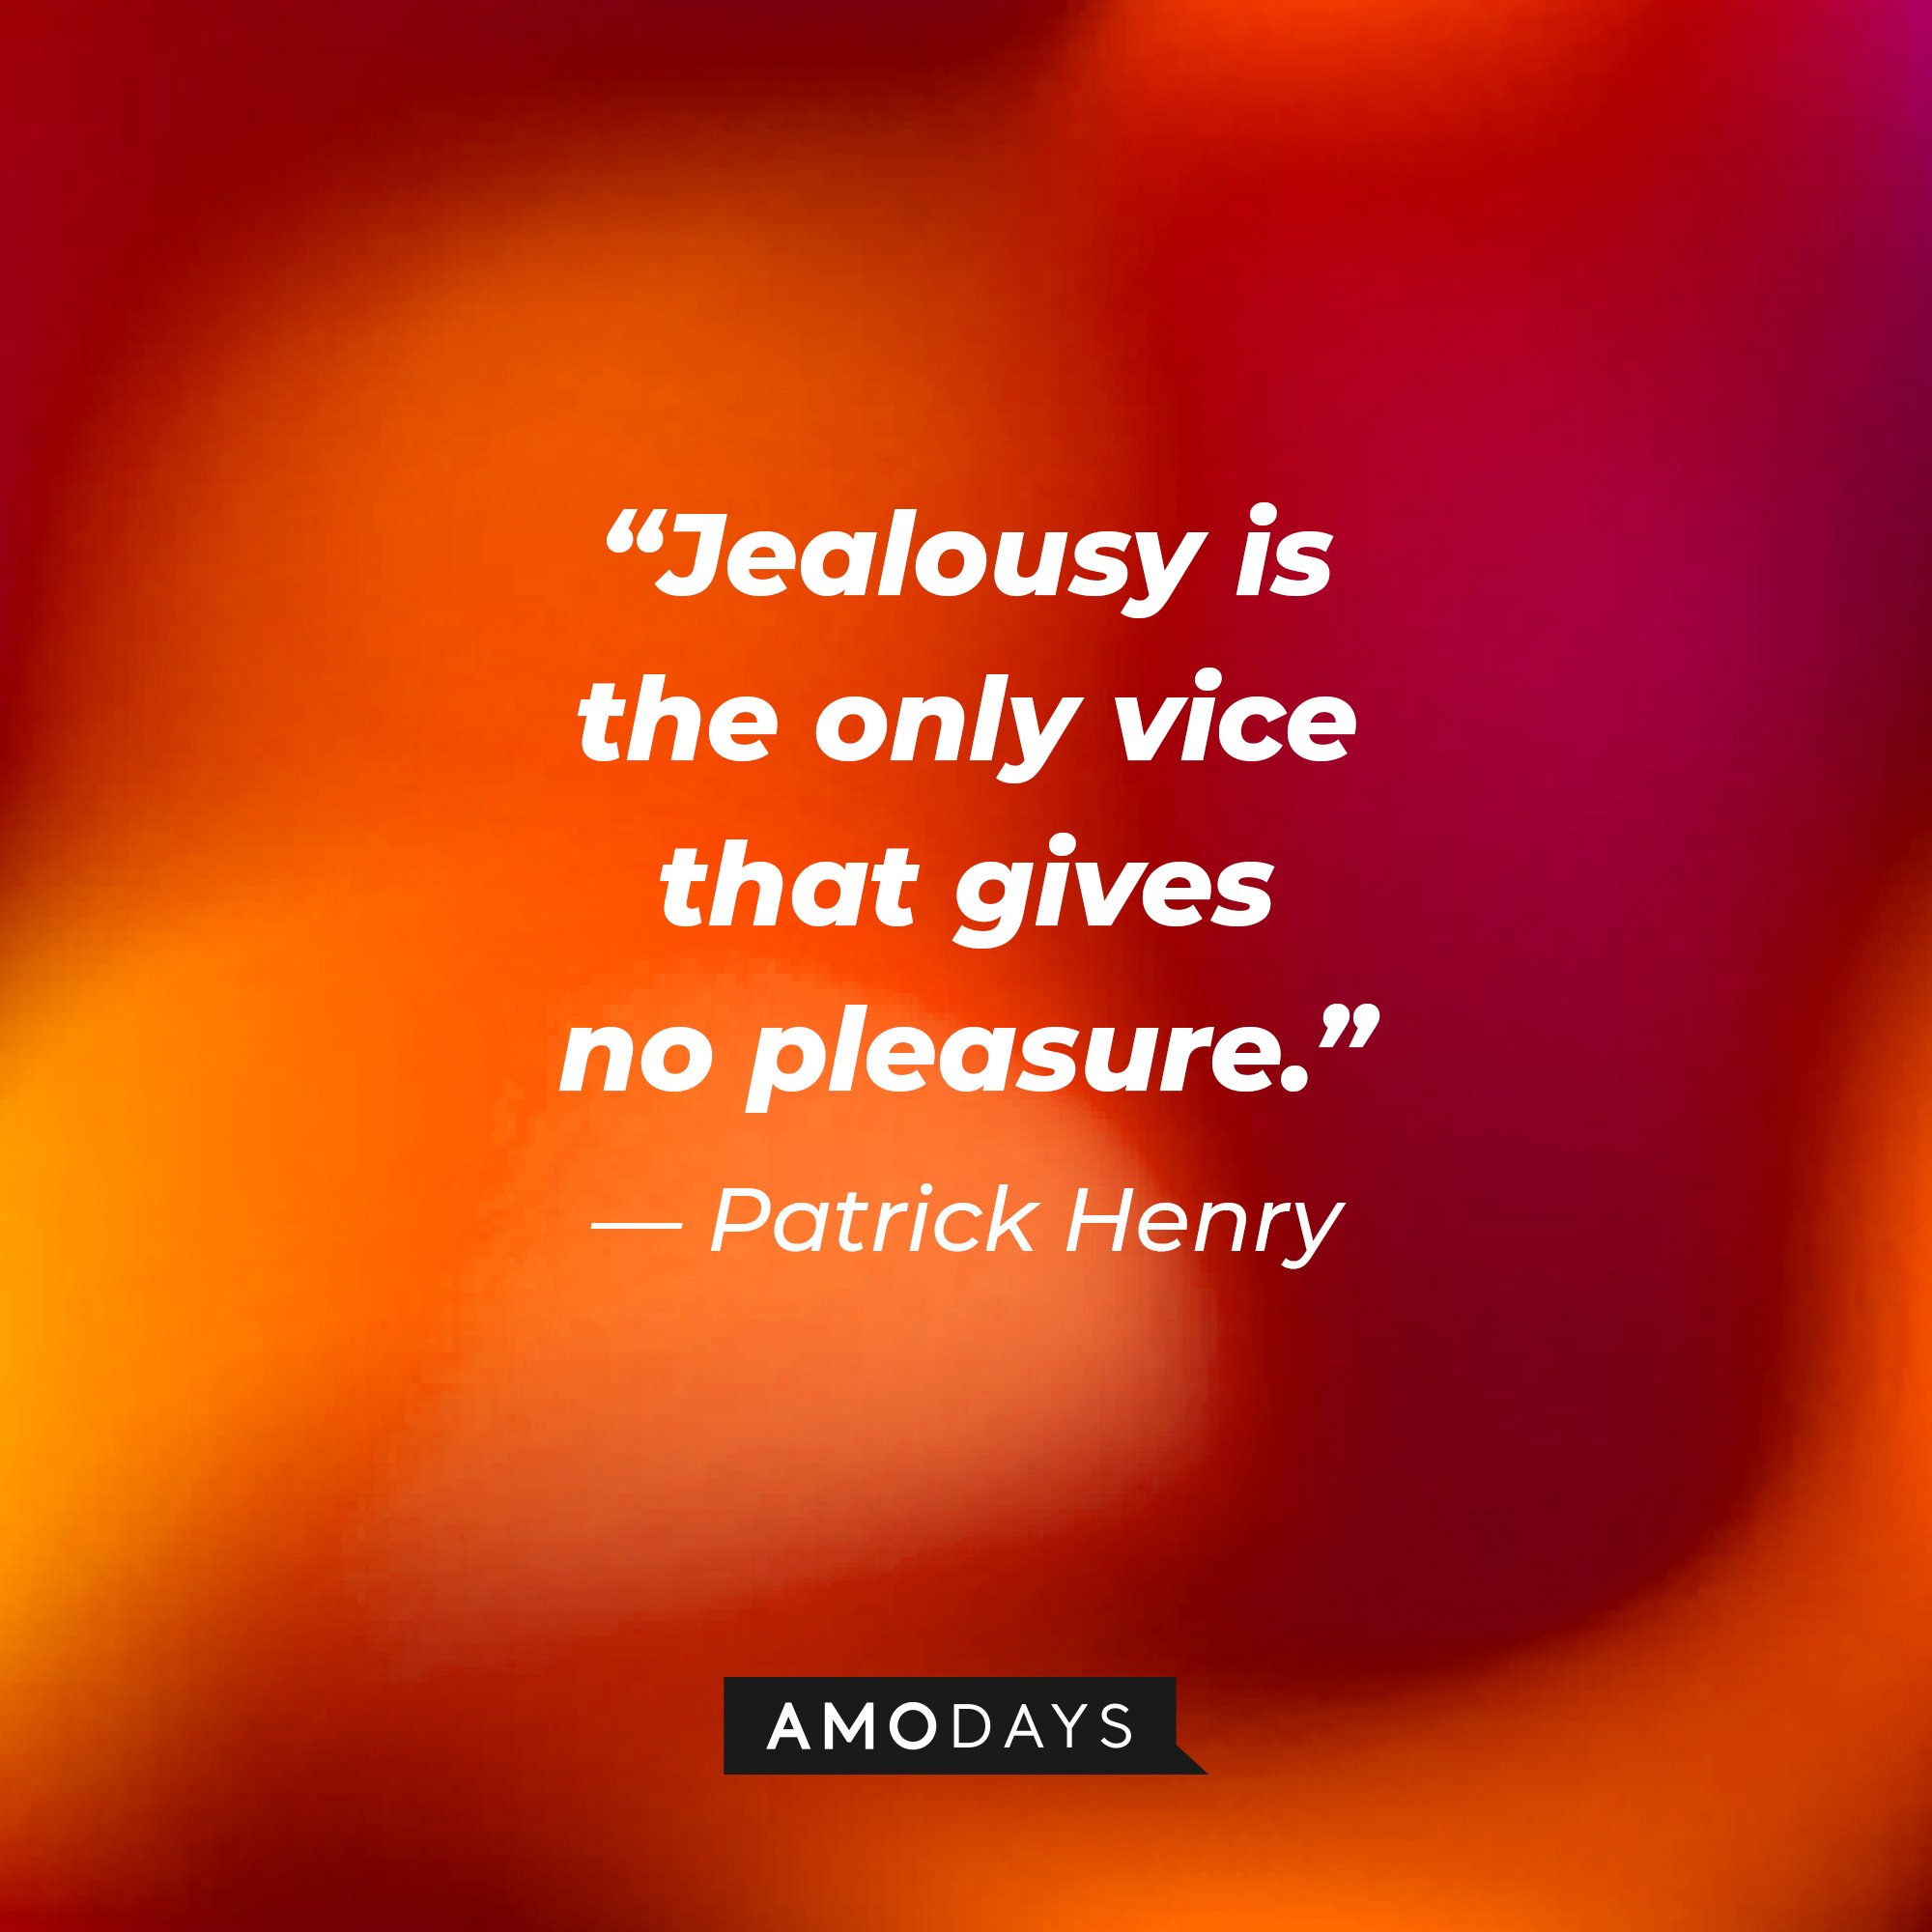 Patrick Henry's quote: “Jealousy is the only vice that gives no pleasure.” | Image: AmoDays